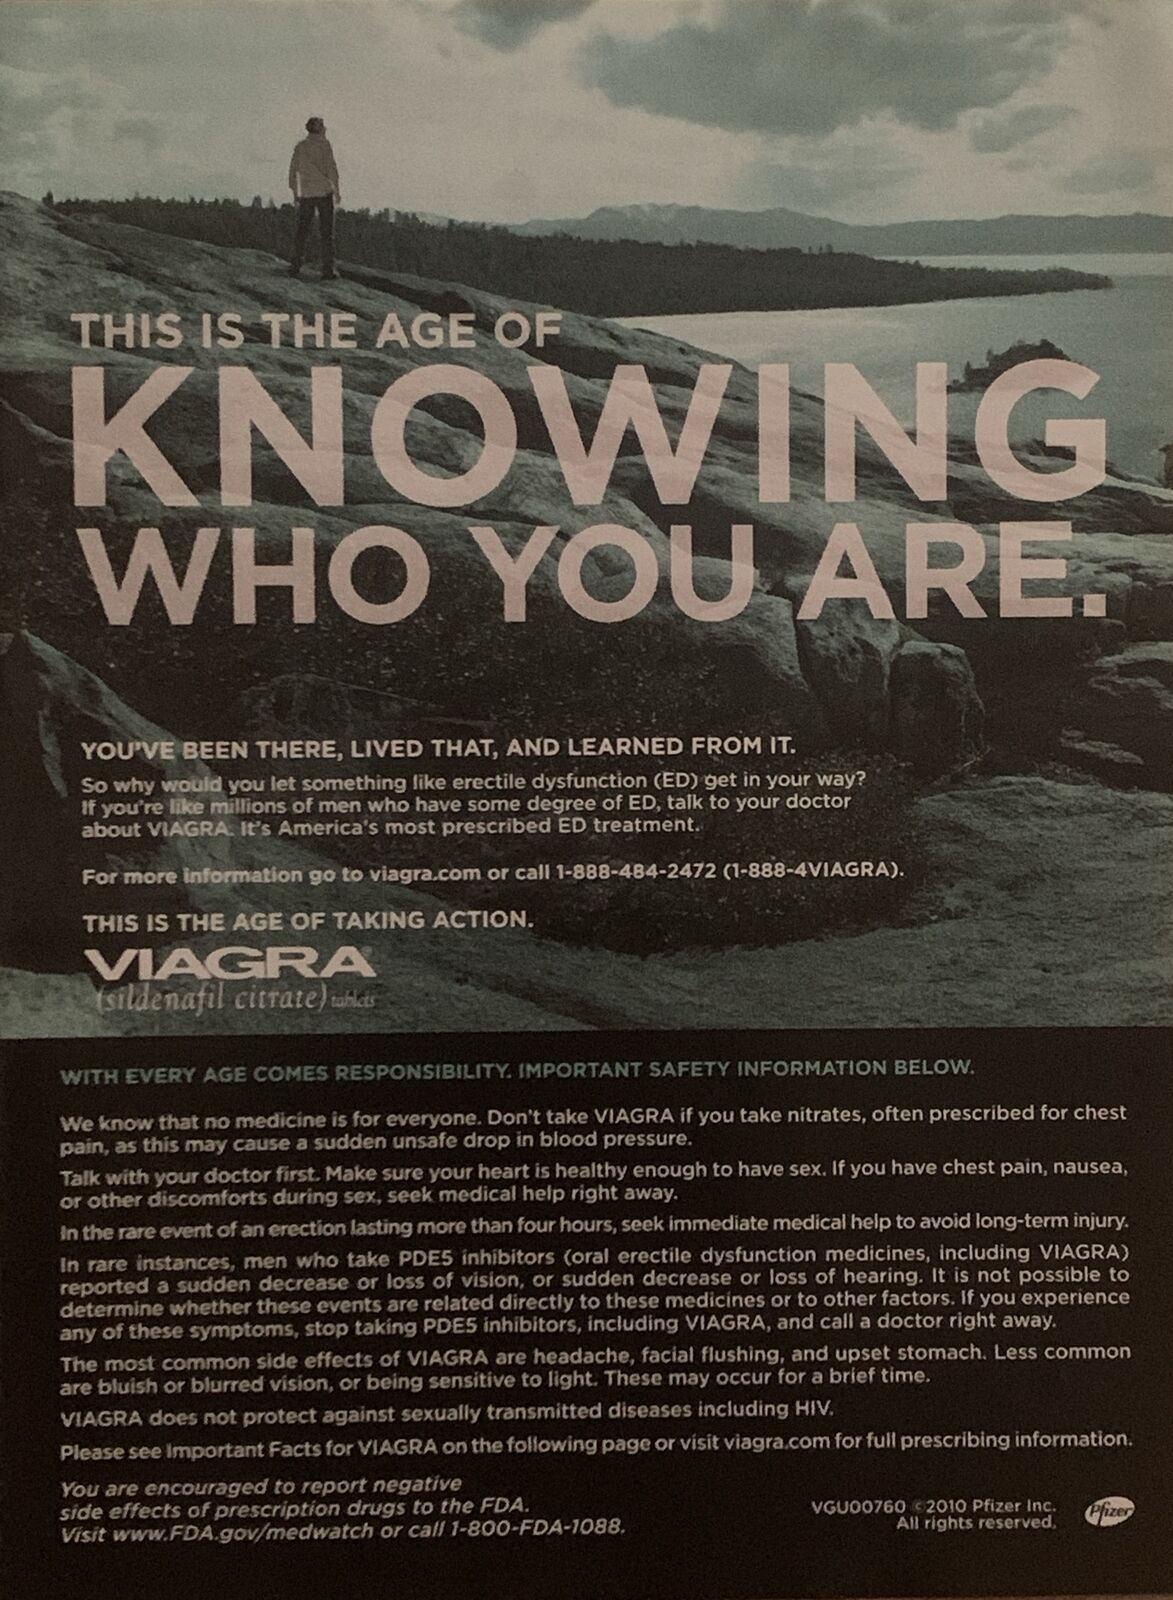 2010 Viagra ED Erectile Dysfunction PRINT AD Shoreline - Age Knowing Who You Are